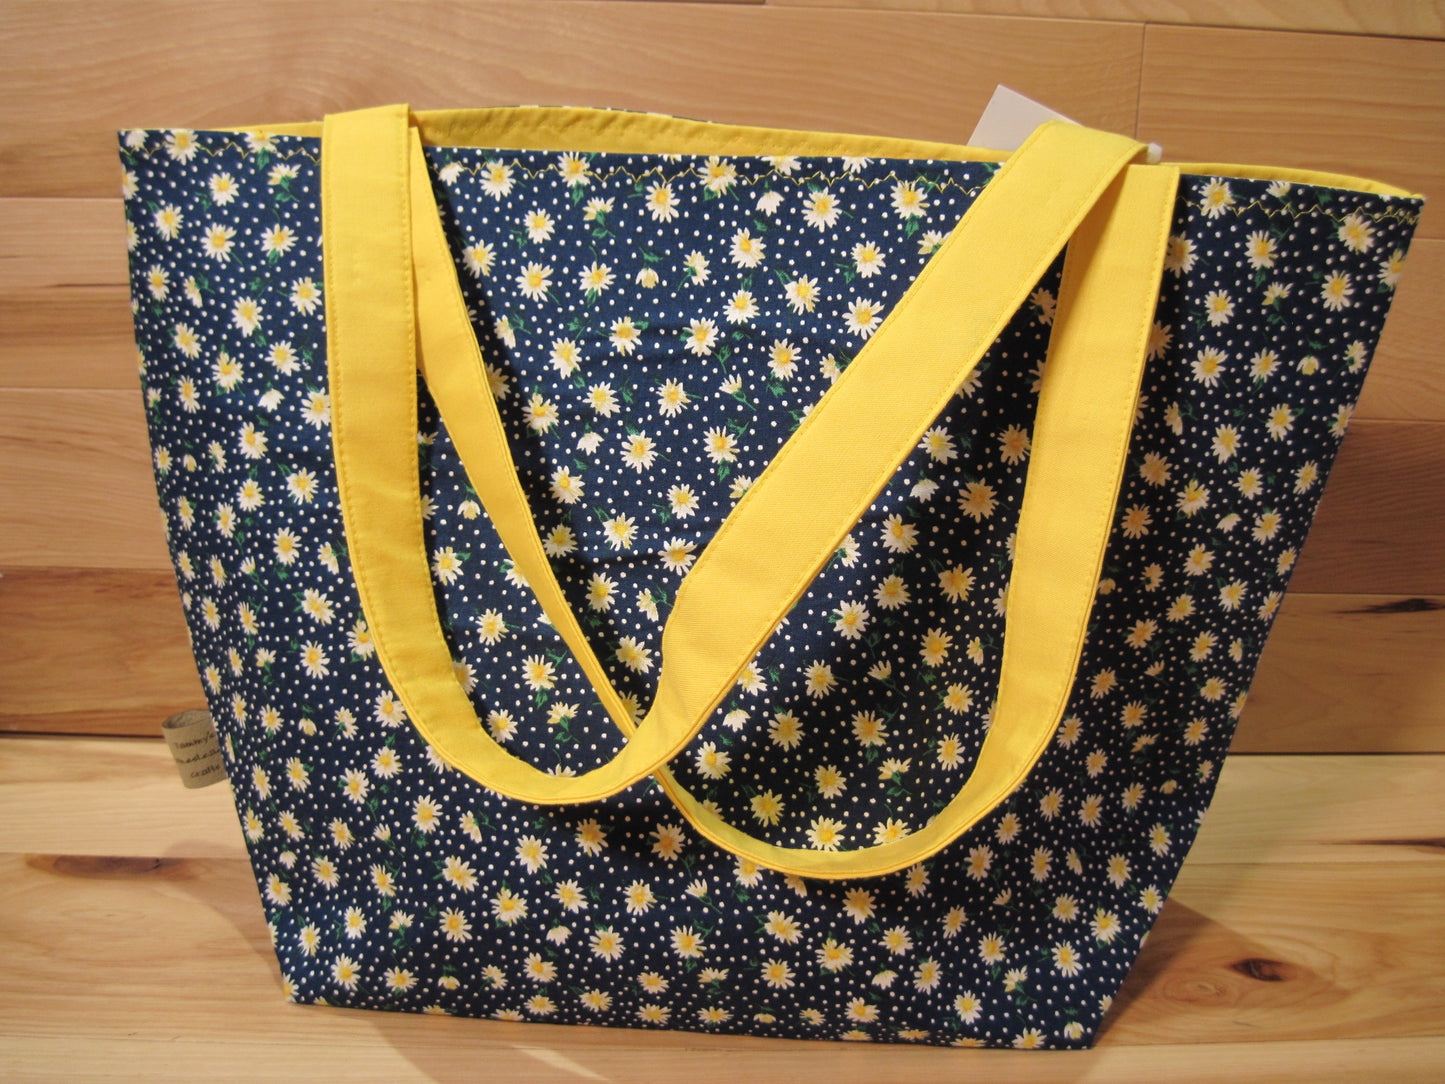 X-Large Tote Style bag ~ Blue w/ daisies, yellow & sewn handles